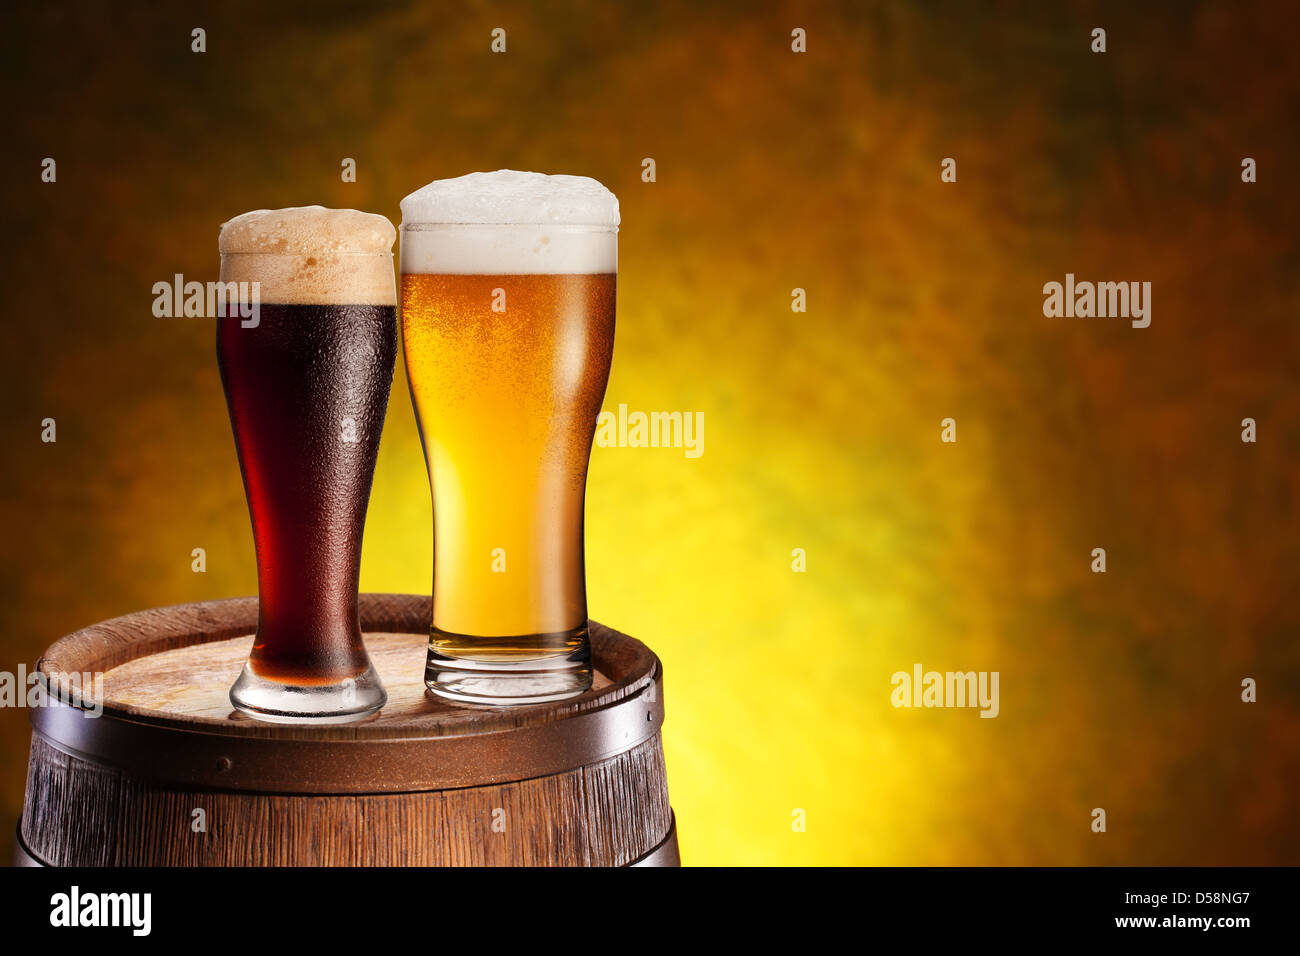 Two glasses of beer on a wooden barrel. Dark yellow background with a gradient. Stock Photo